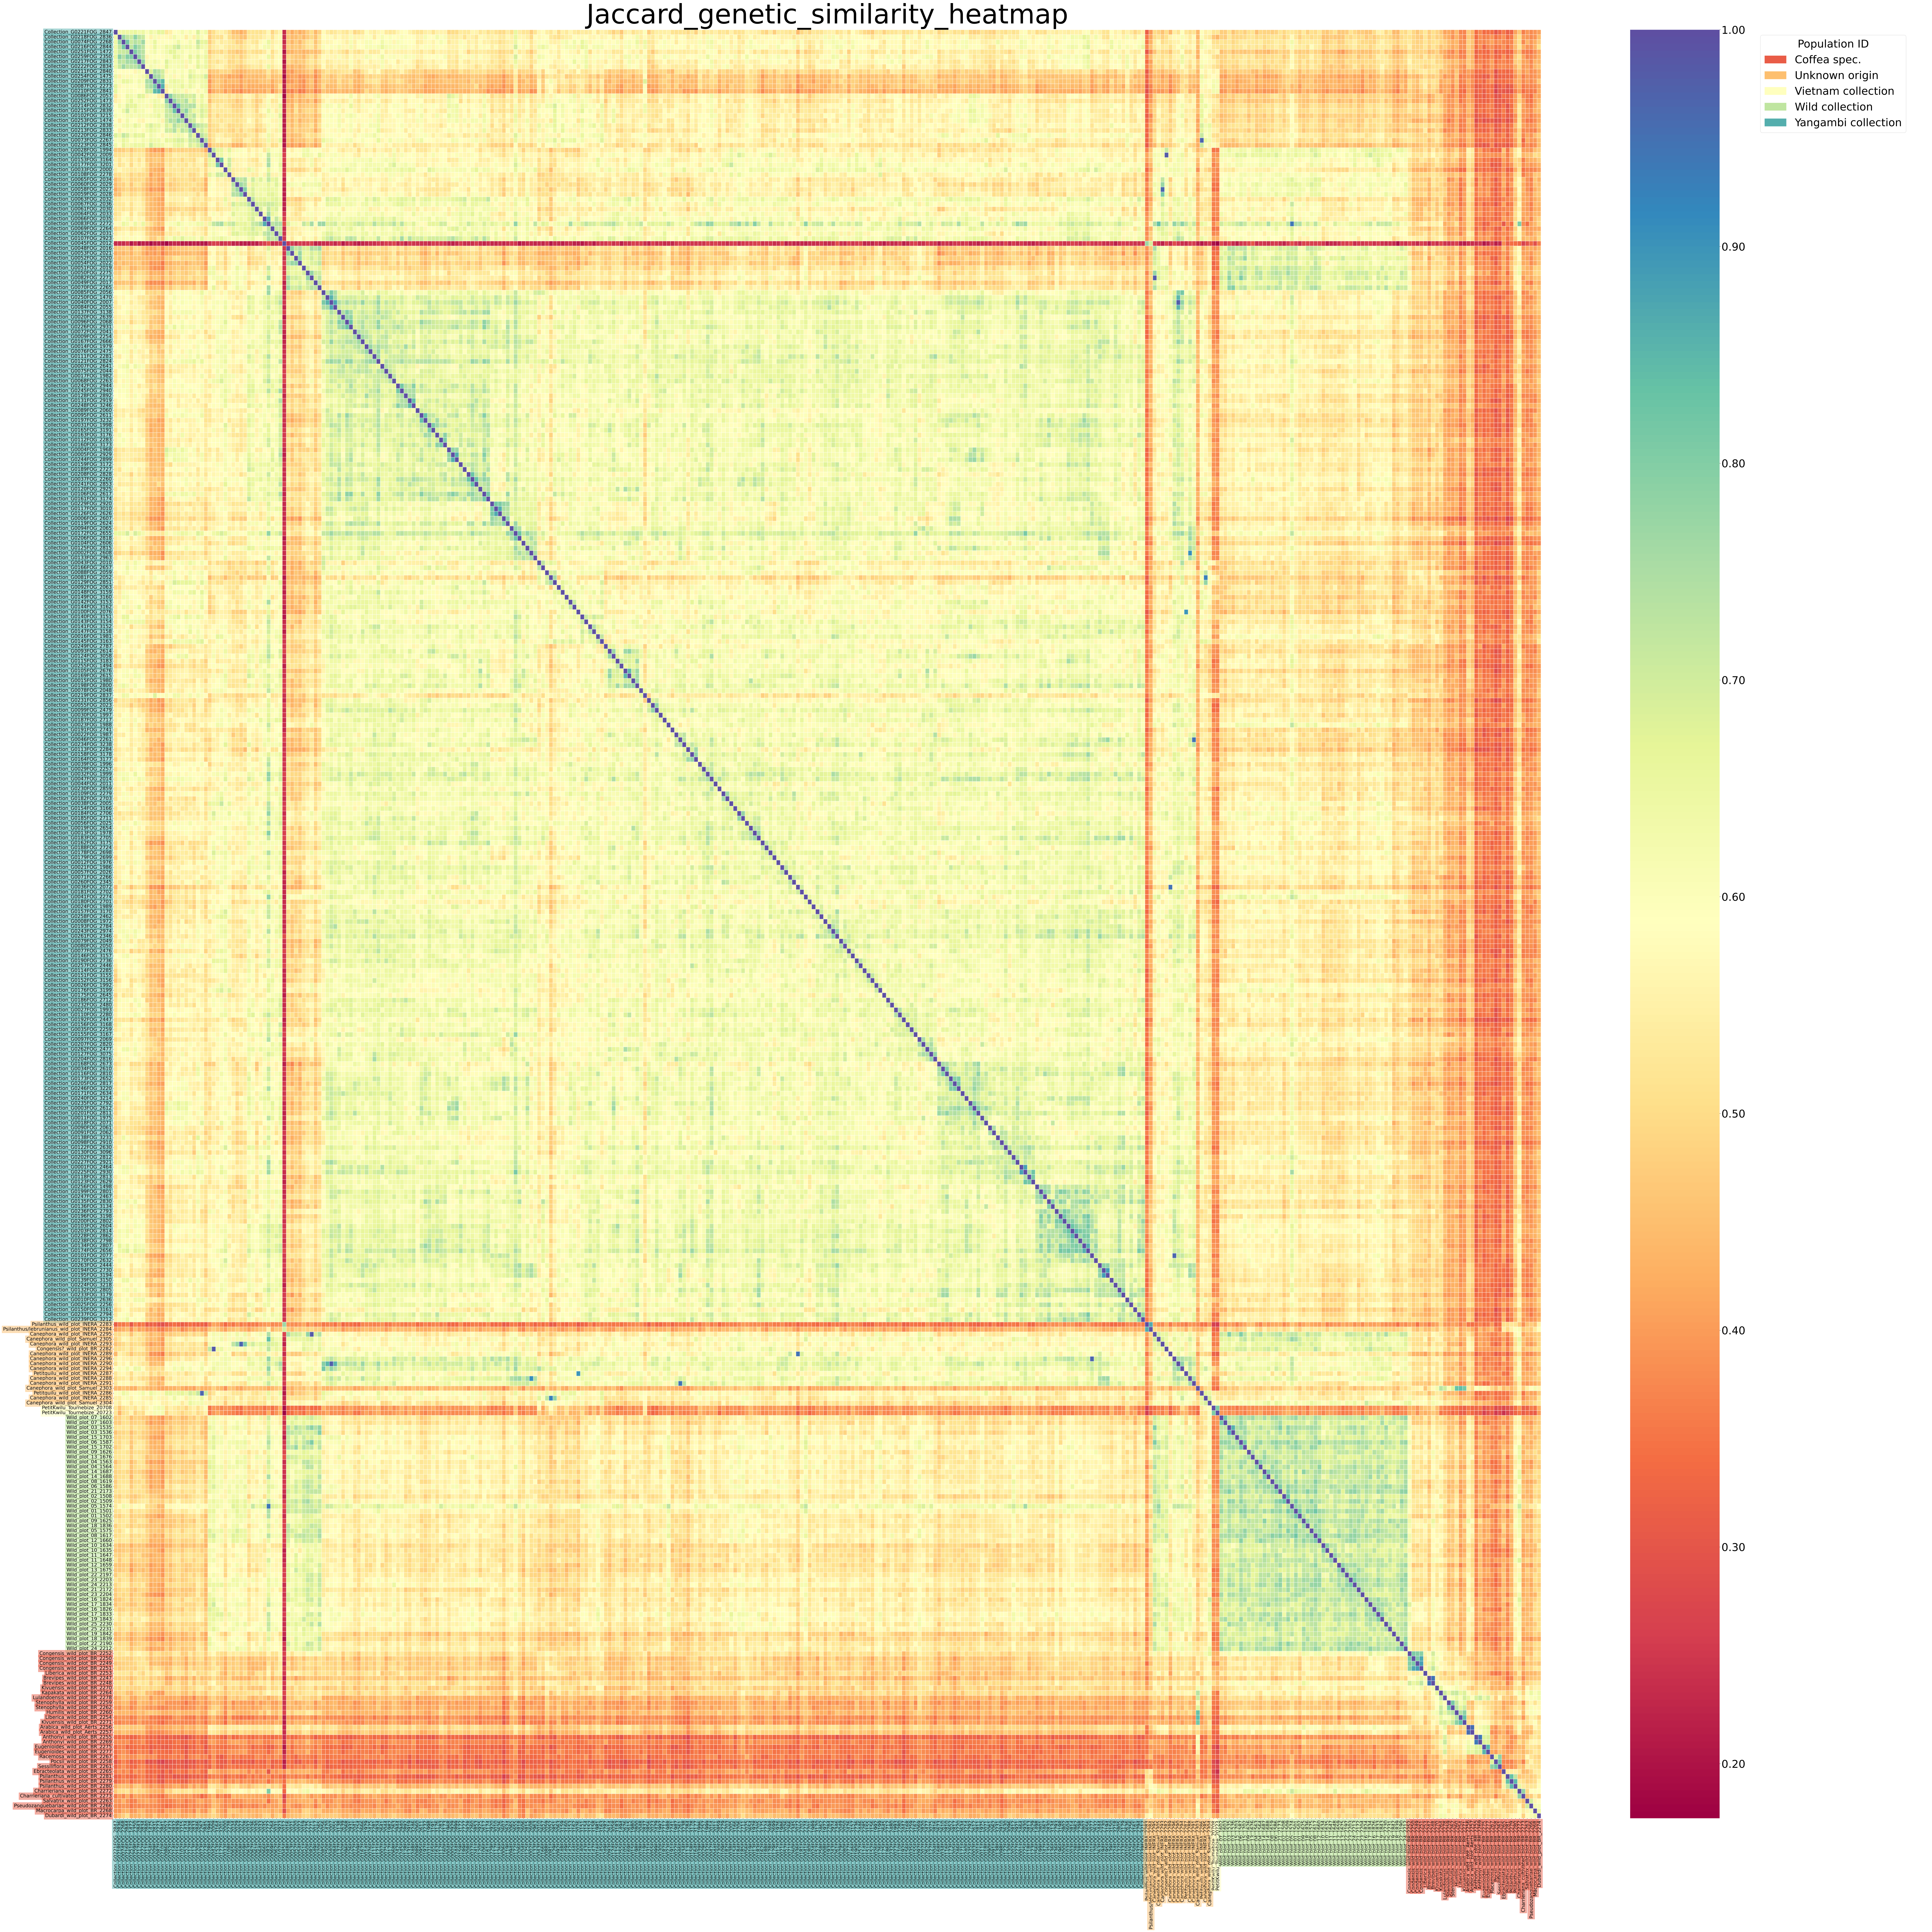 ../_images/Jaccard_genetic_similarity_heatmap_grouped.png